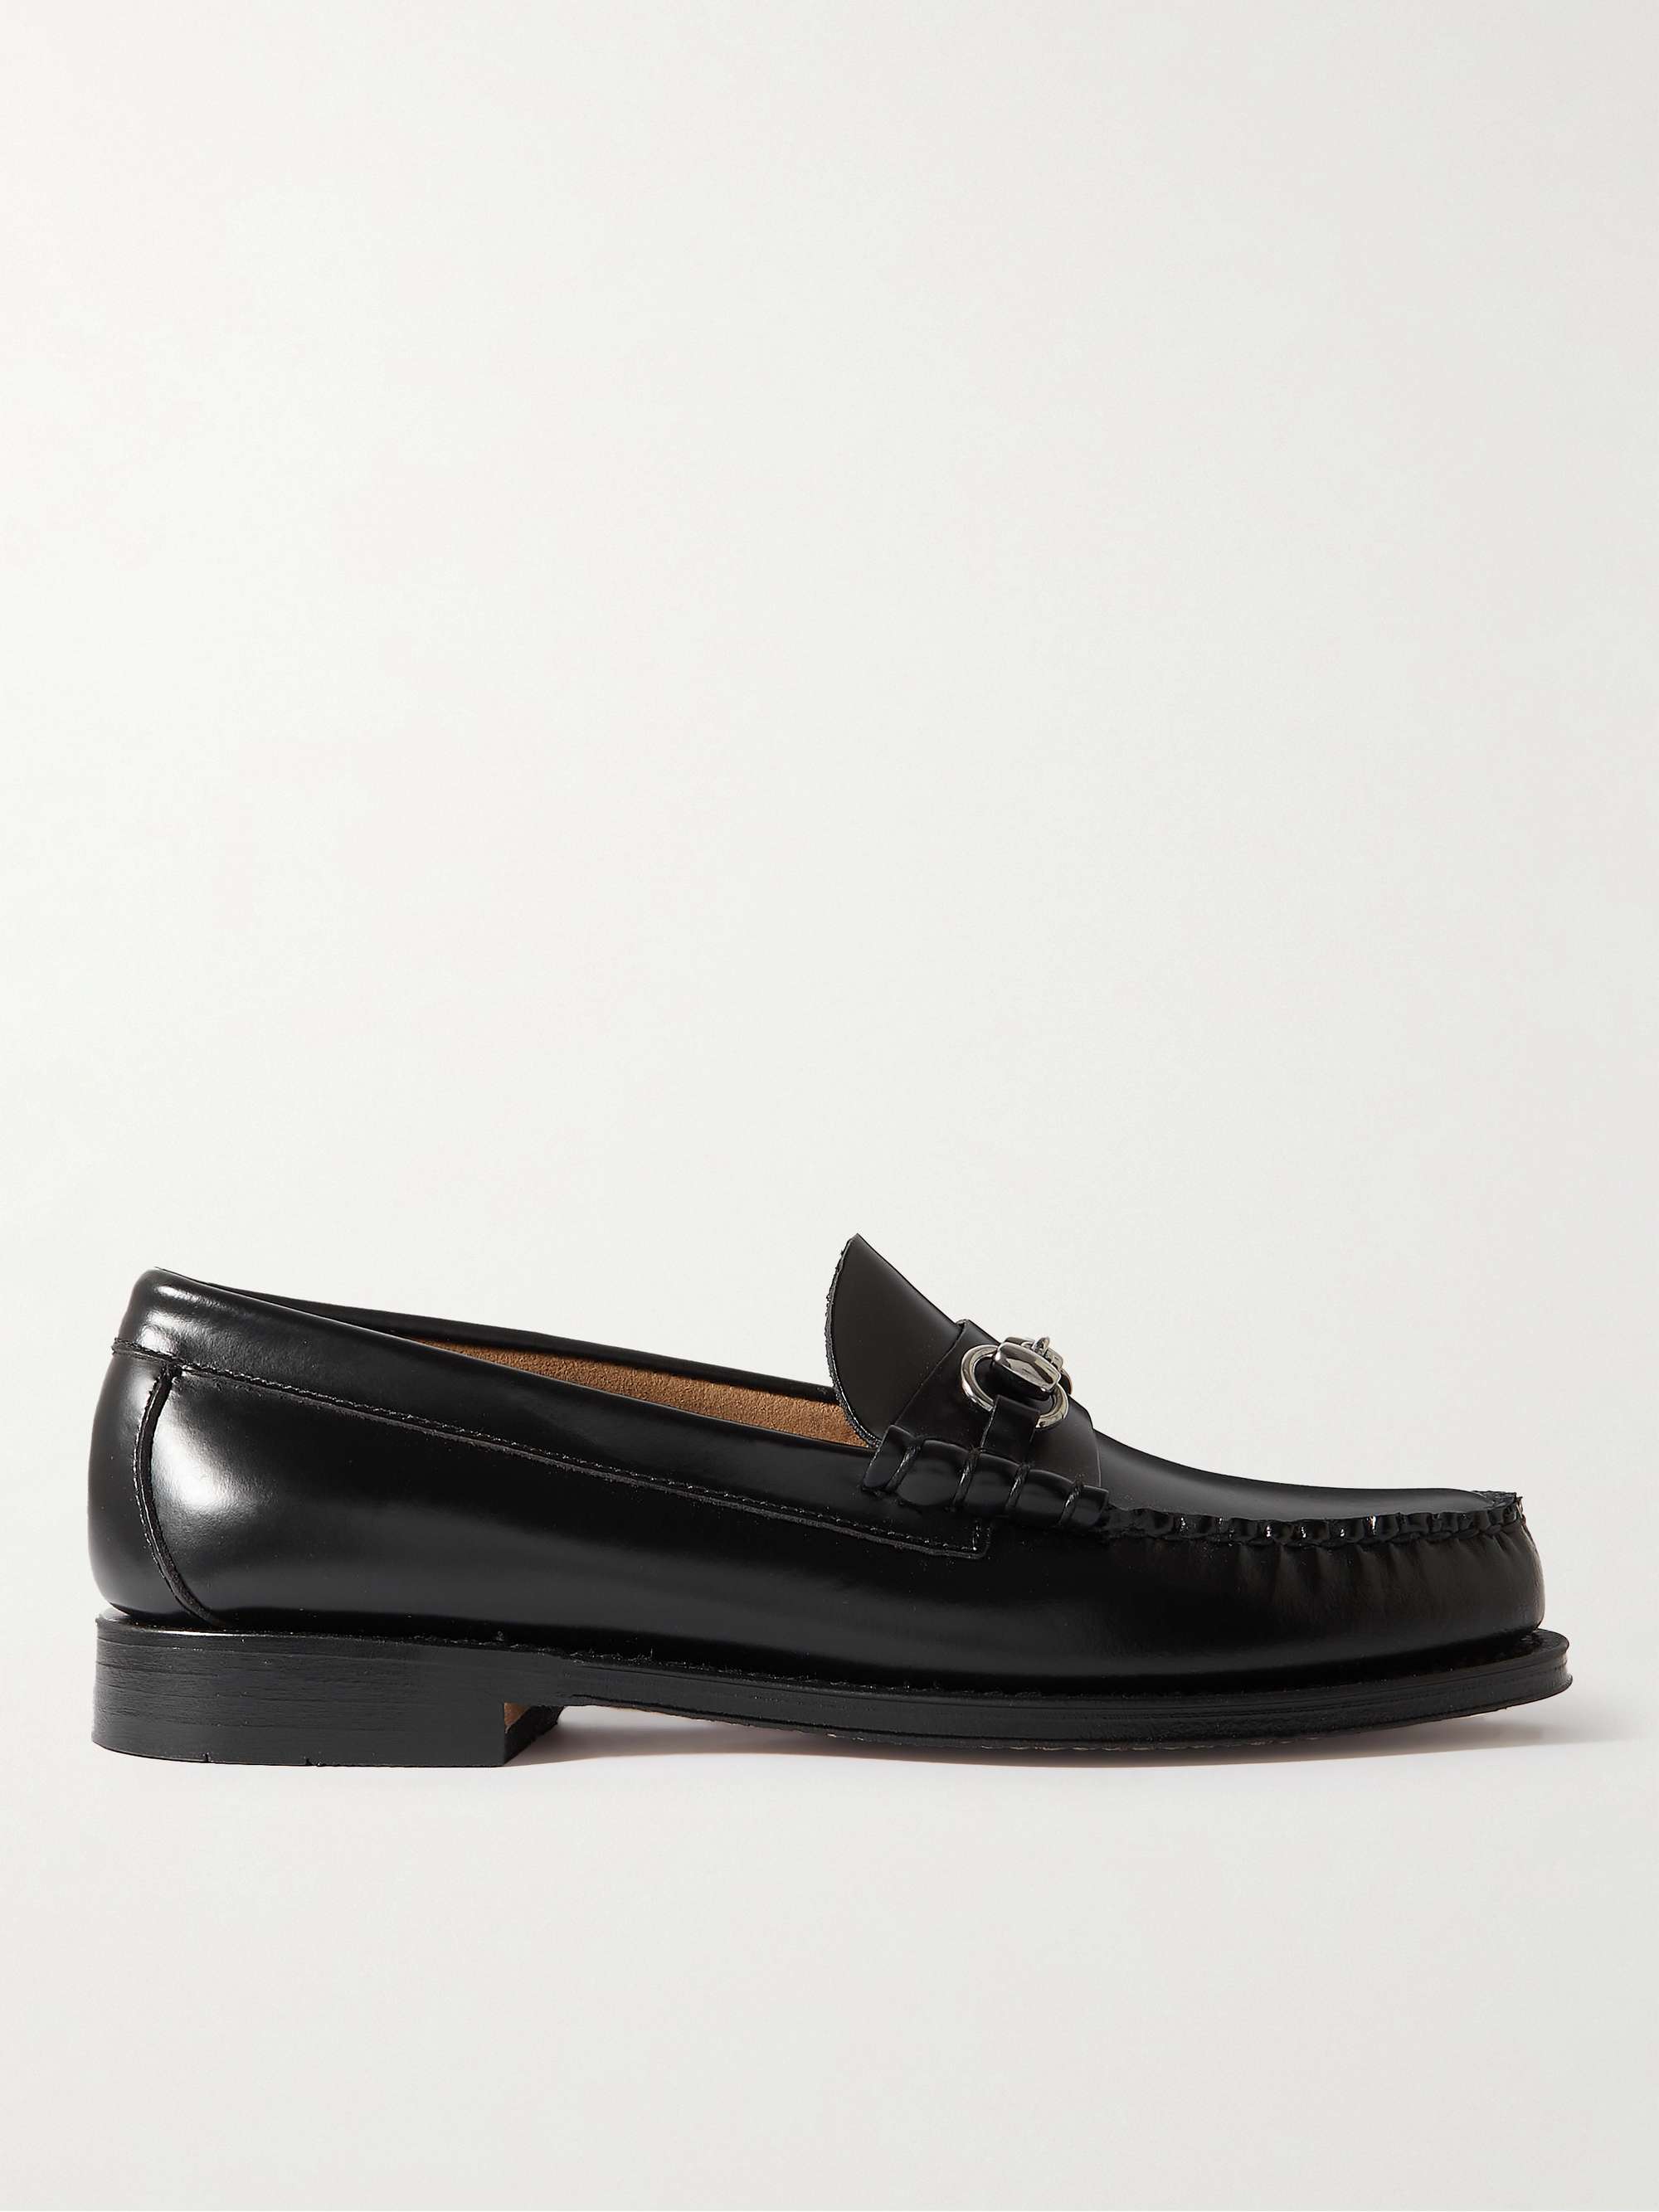 G.H. BASS & CO. Weejuns Heritage Lincoln Horsebit Leather Penny Loafers |  MR PORTER